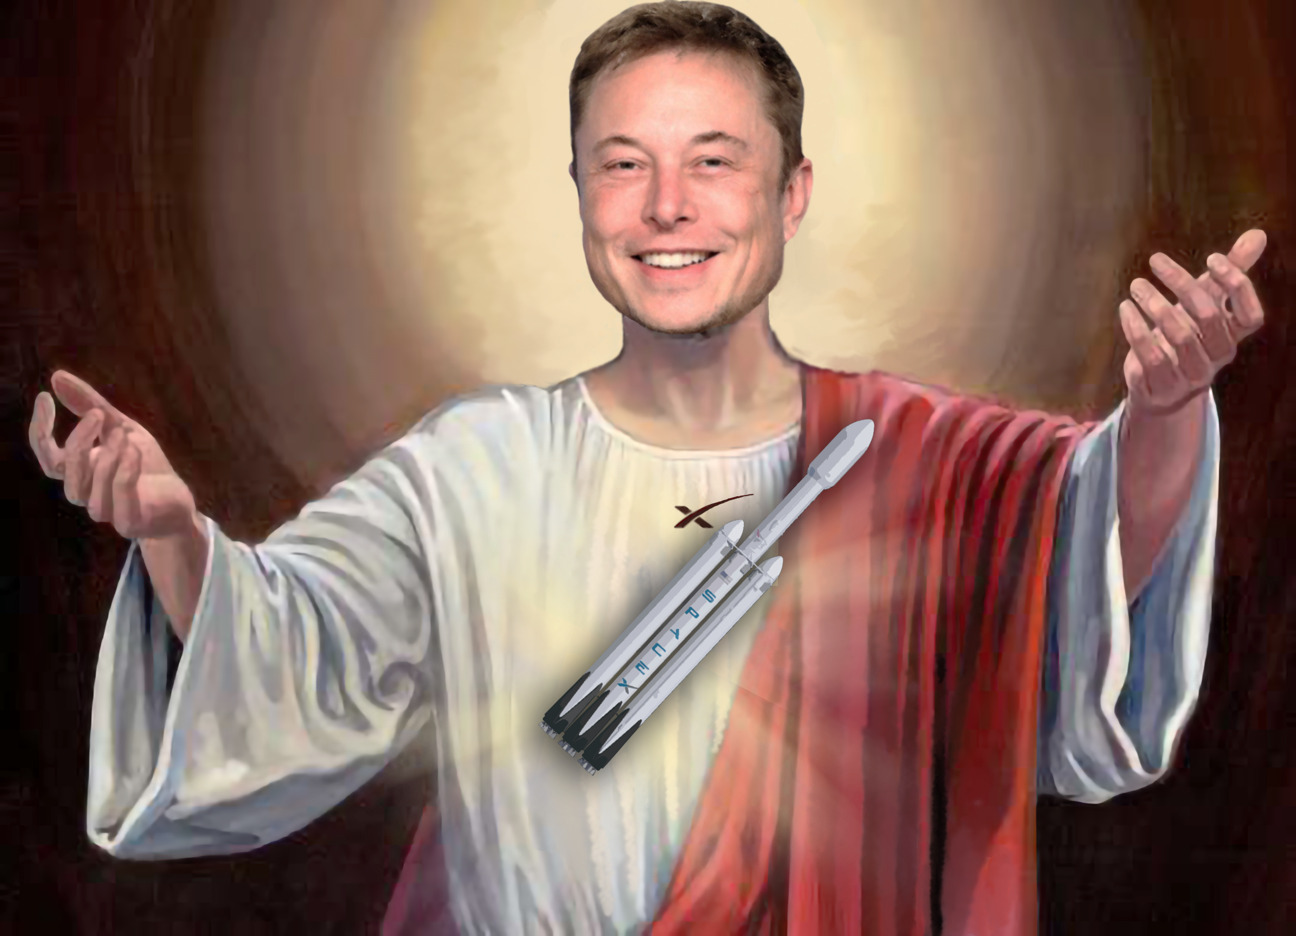 Elon Musk Sticker Our Lord and Savior Car Bumper SpaceX Decal #S27